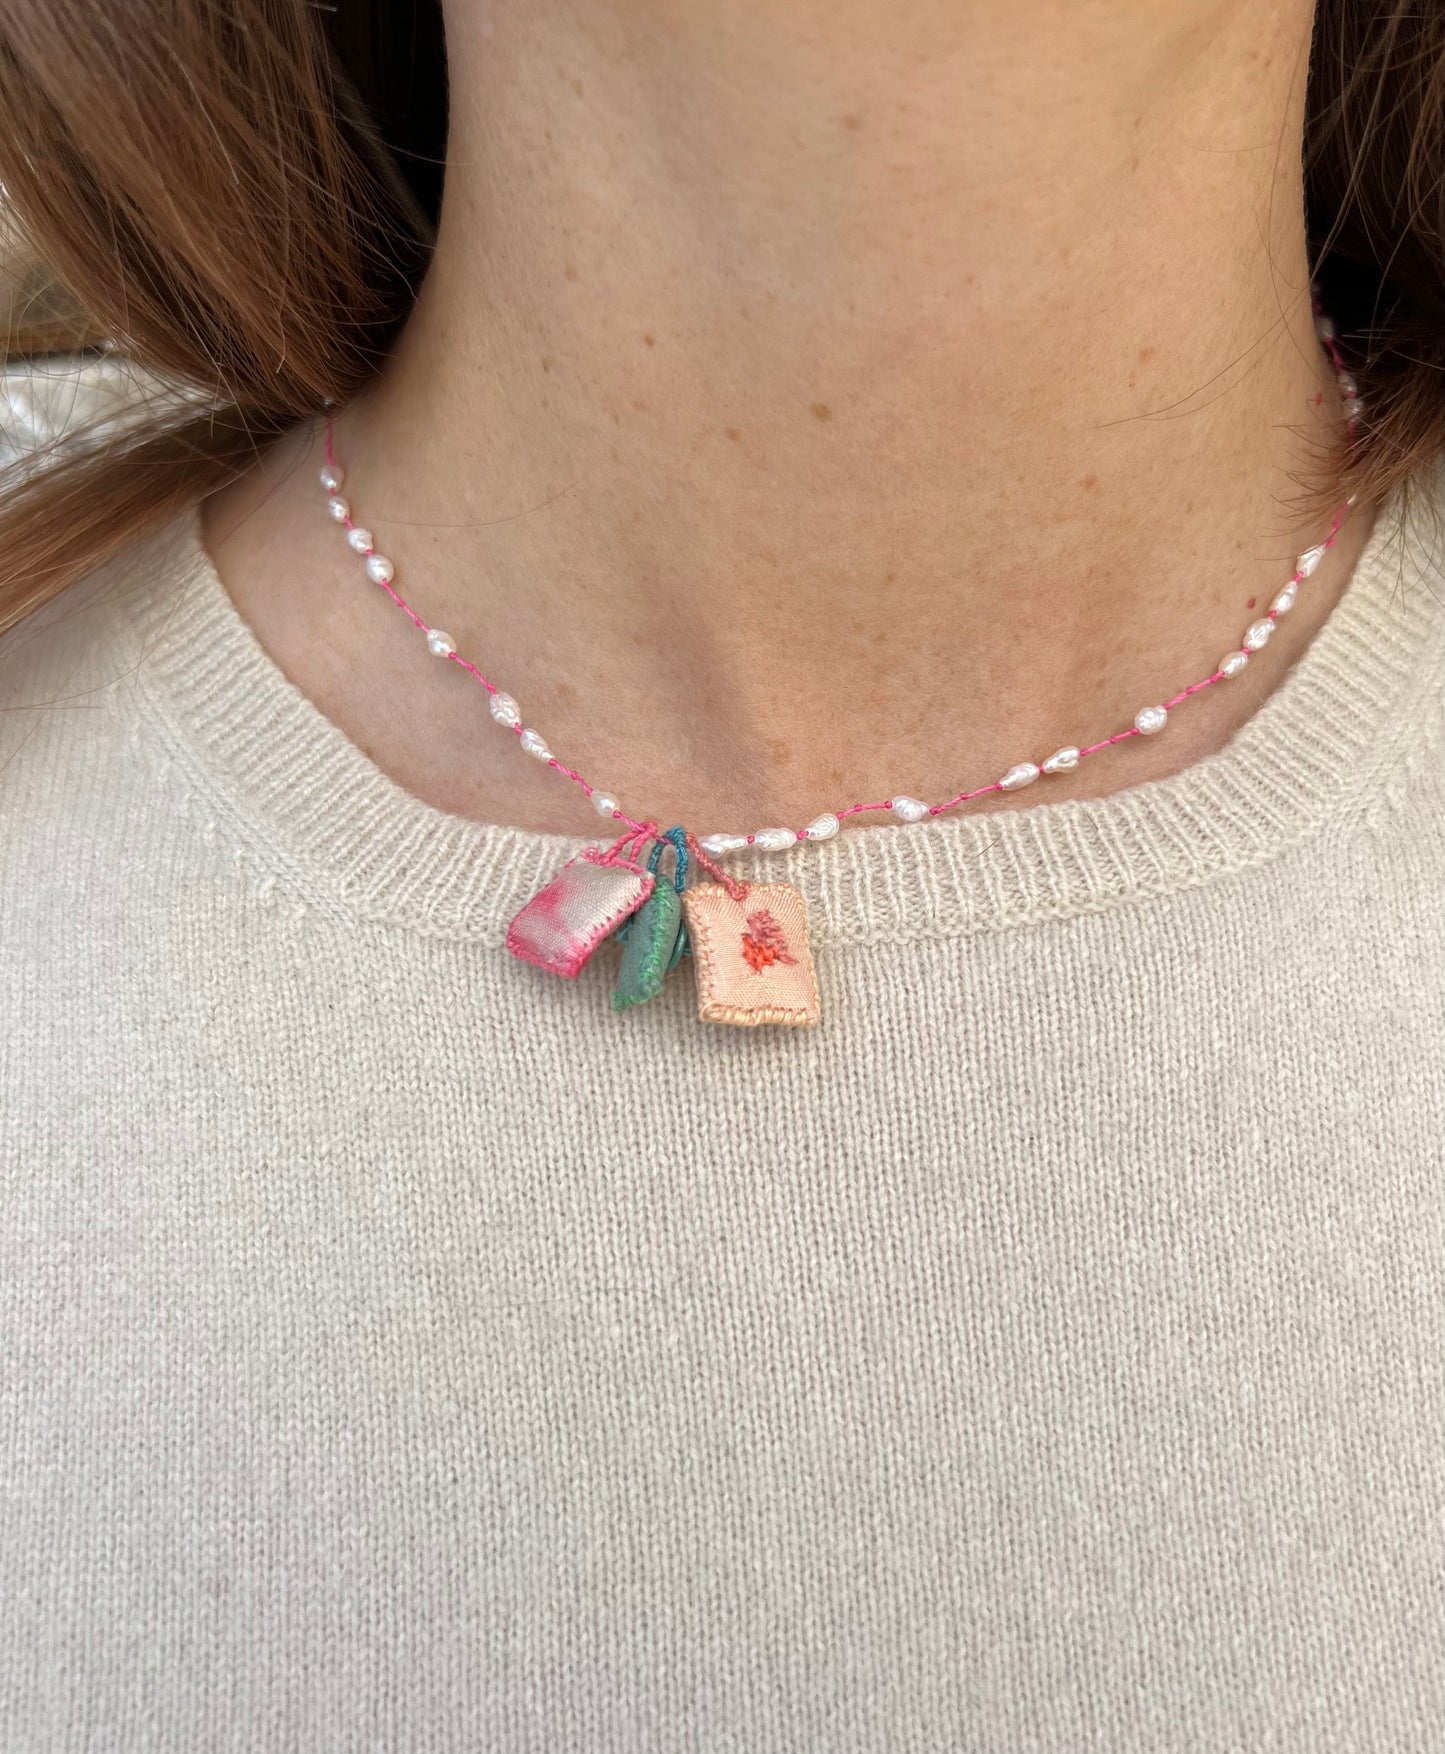 Necklace - ‘Sophia’ Mother Pearl necklace with tie and dye pink, turquoise and salmon cushions